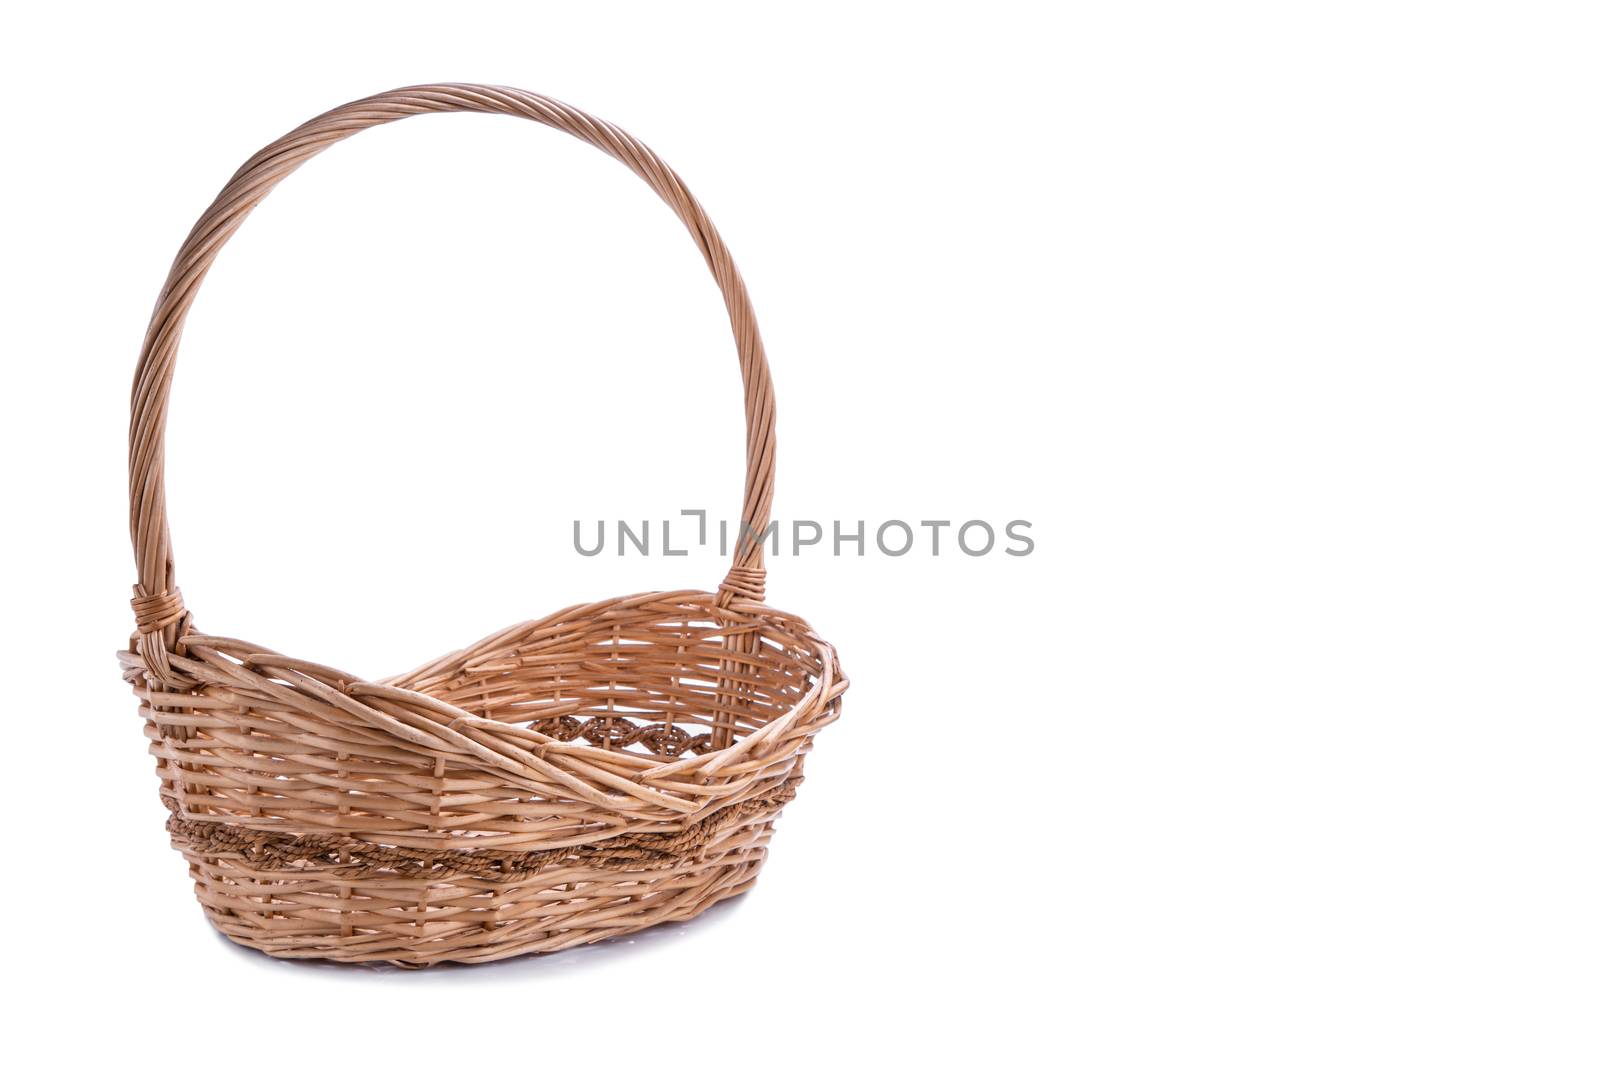 Wicker basket with copy space isolated on white background by Buttus_casso